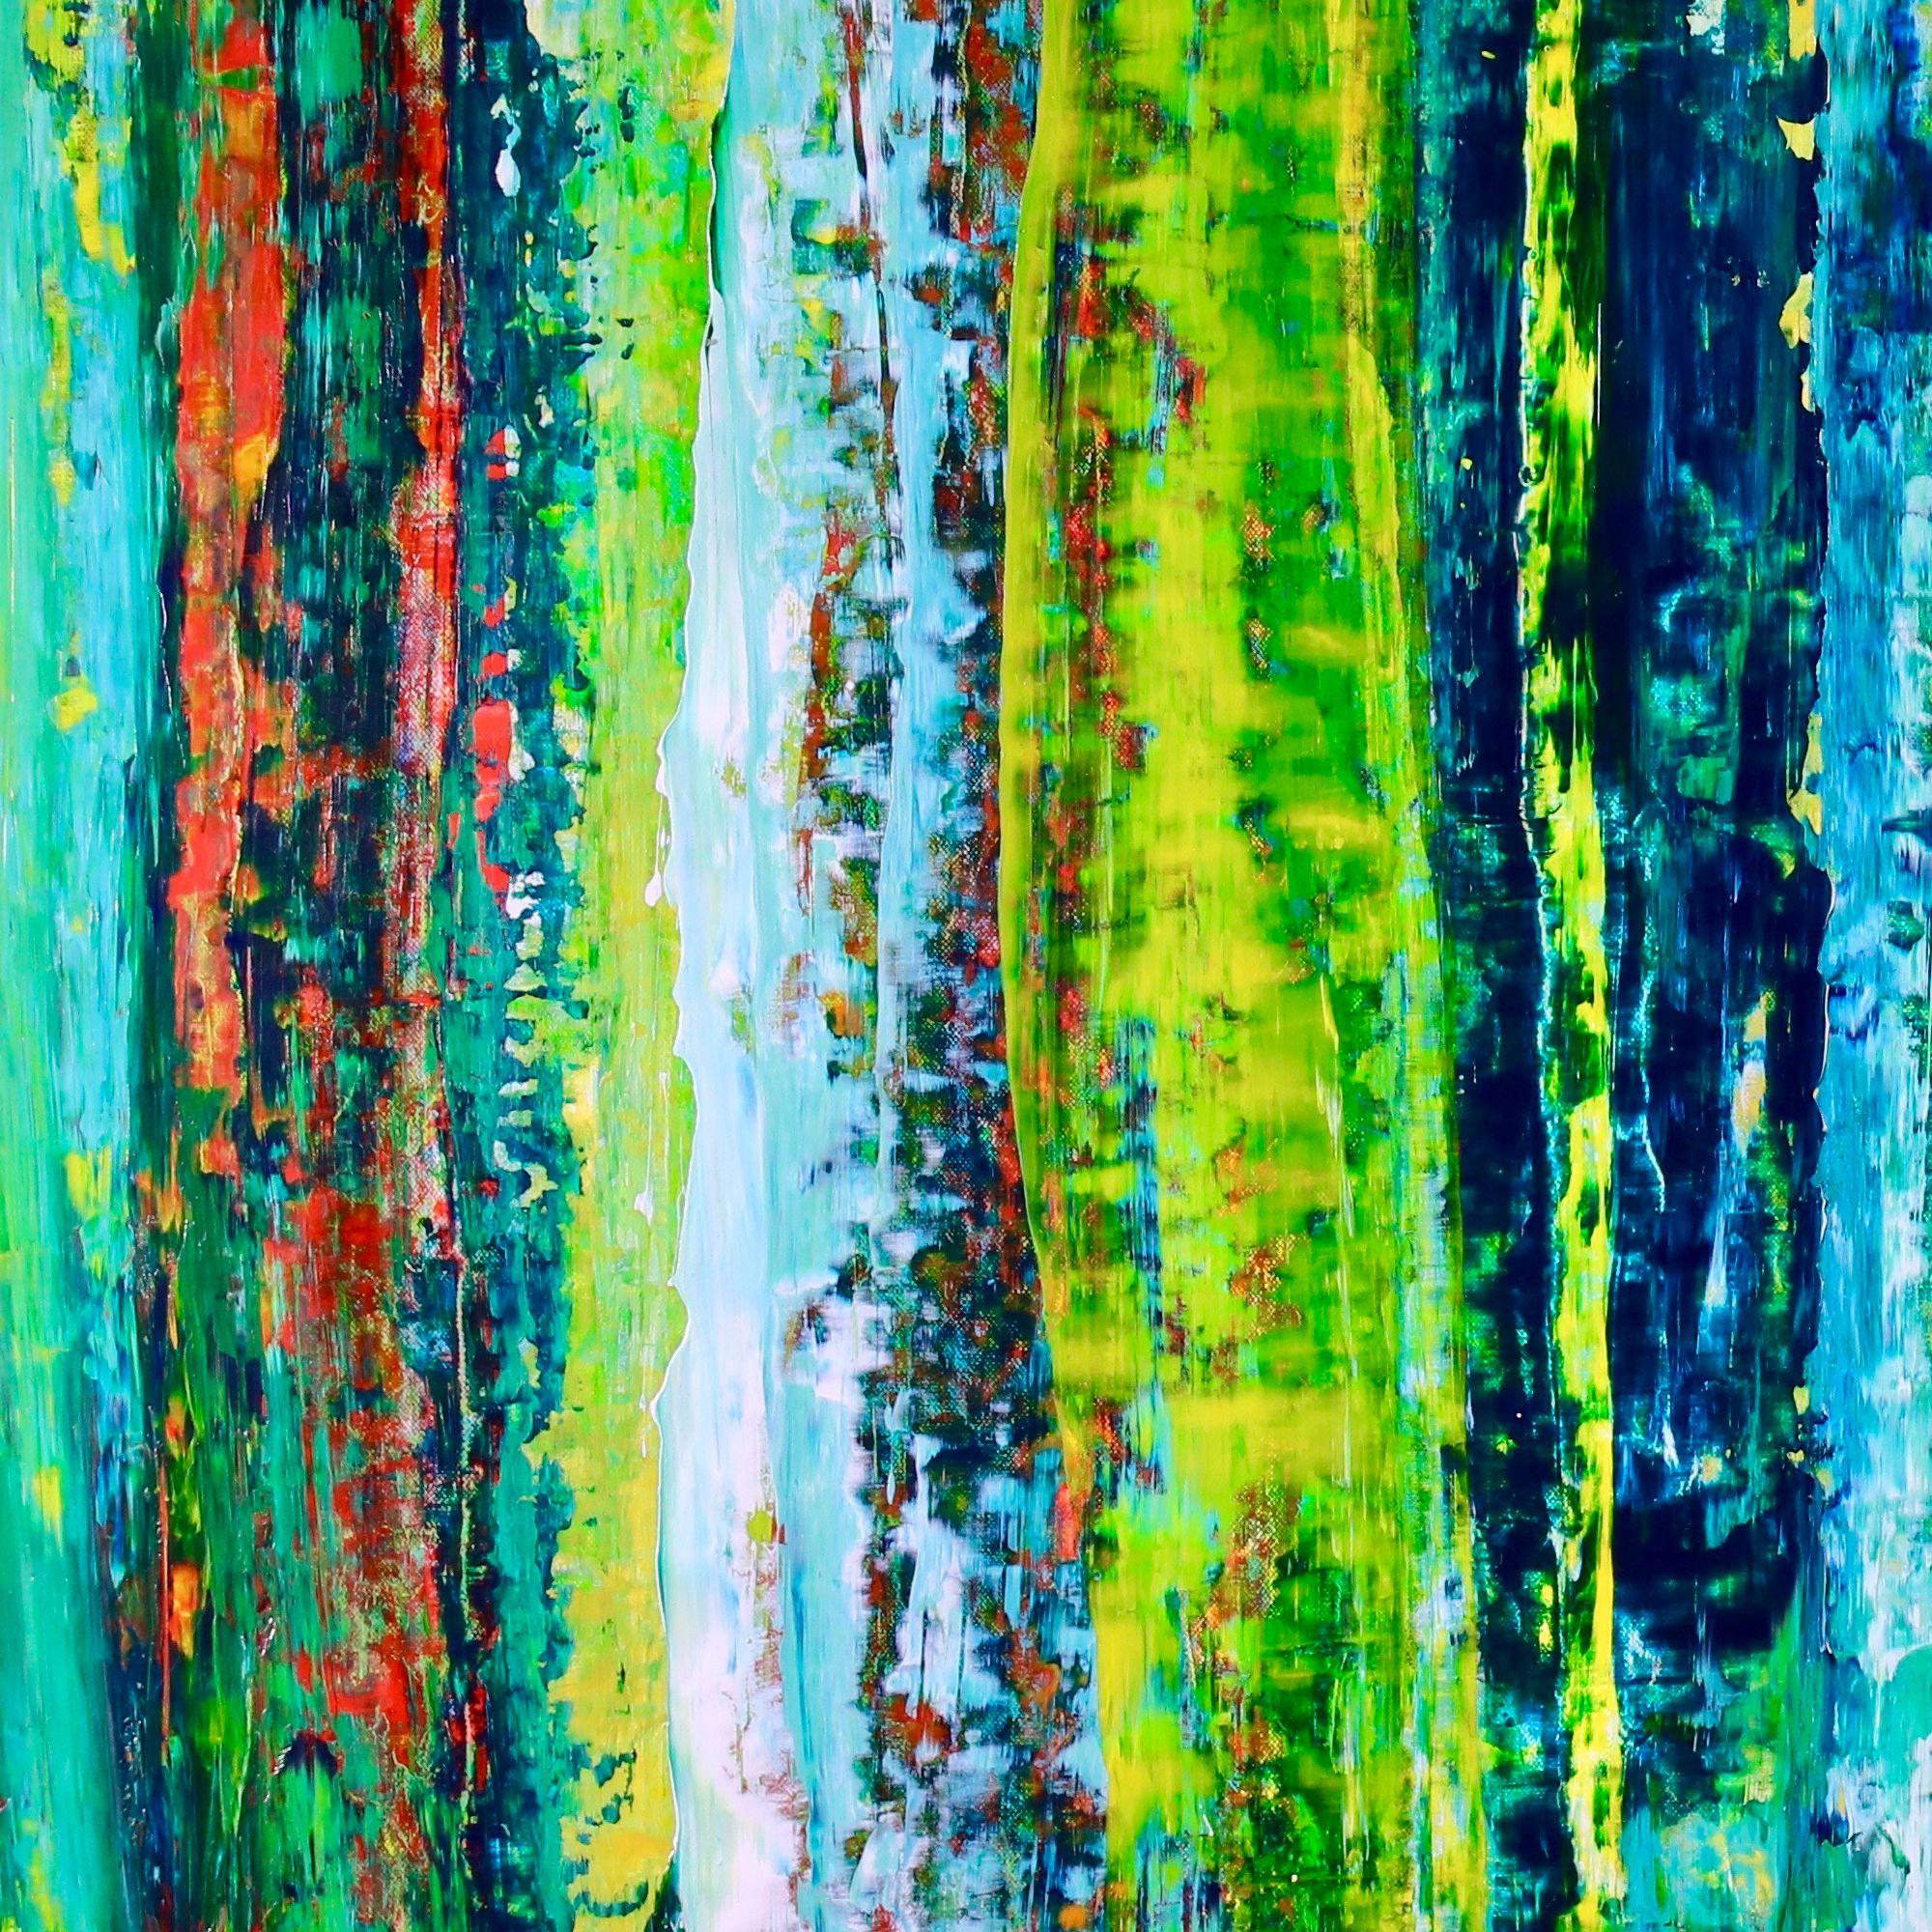 Landscape expressions No.3, Painting, Acrylic on Canvas - Green Abstract Painting by Nestor Toro